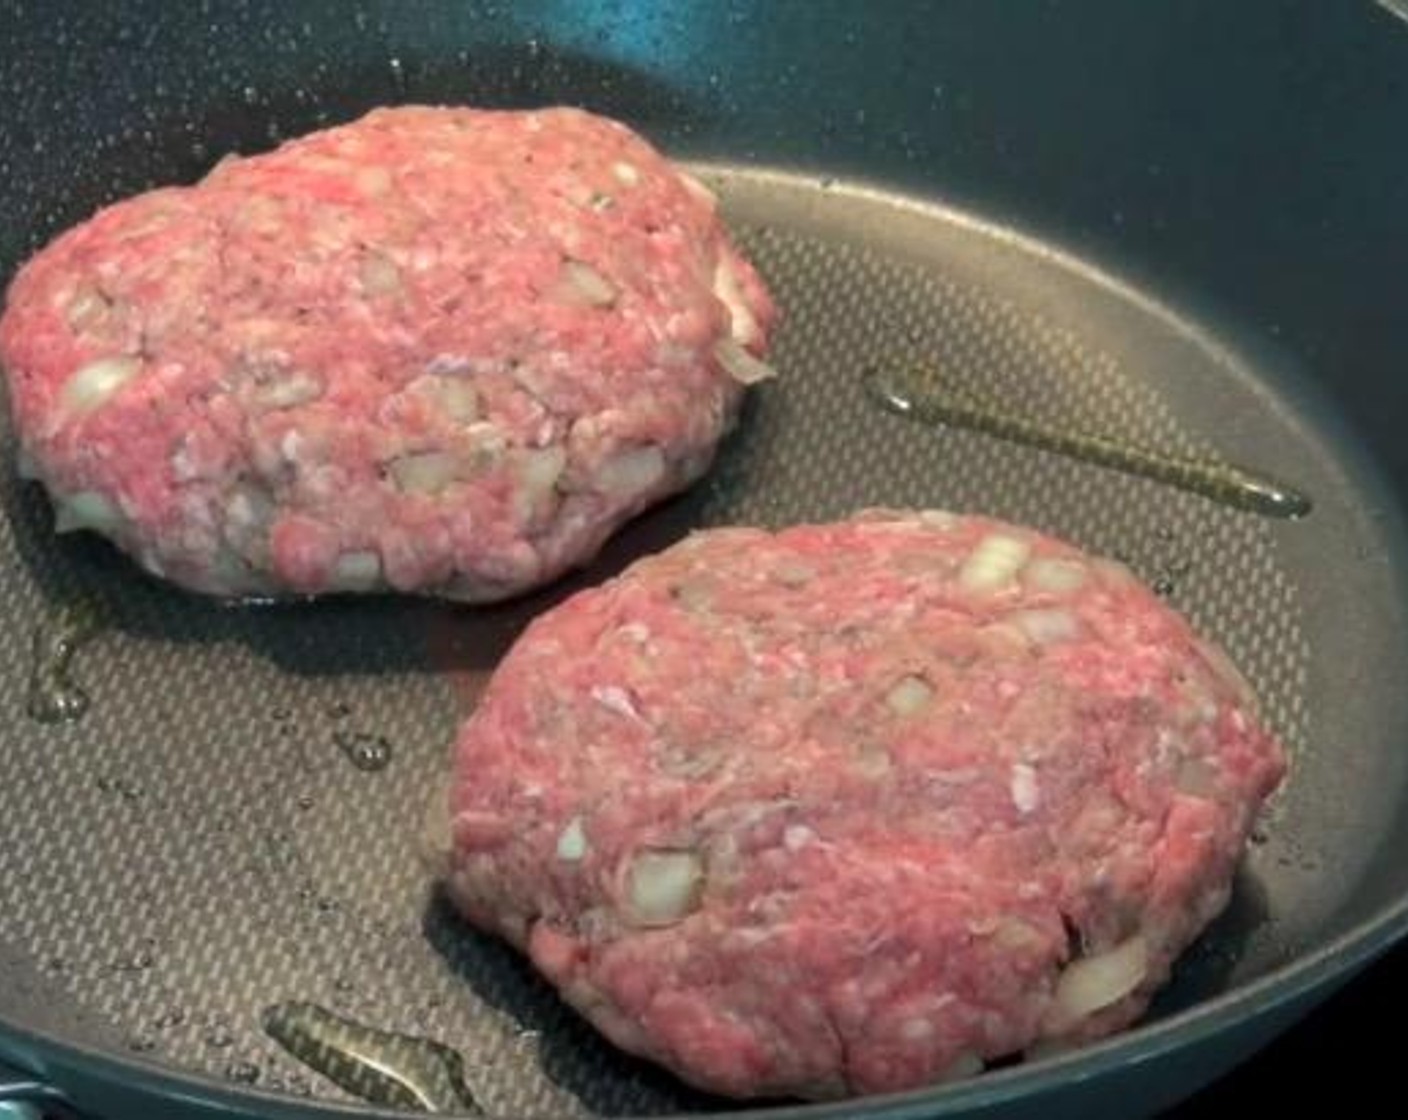 step 3 In a lightly greased pan over medium-high heat, cook the patties for 4-5 minutes.